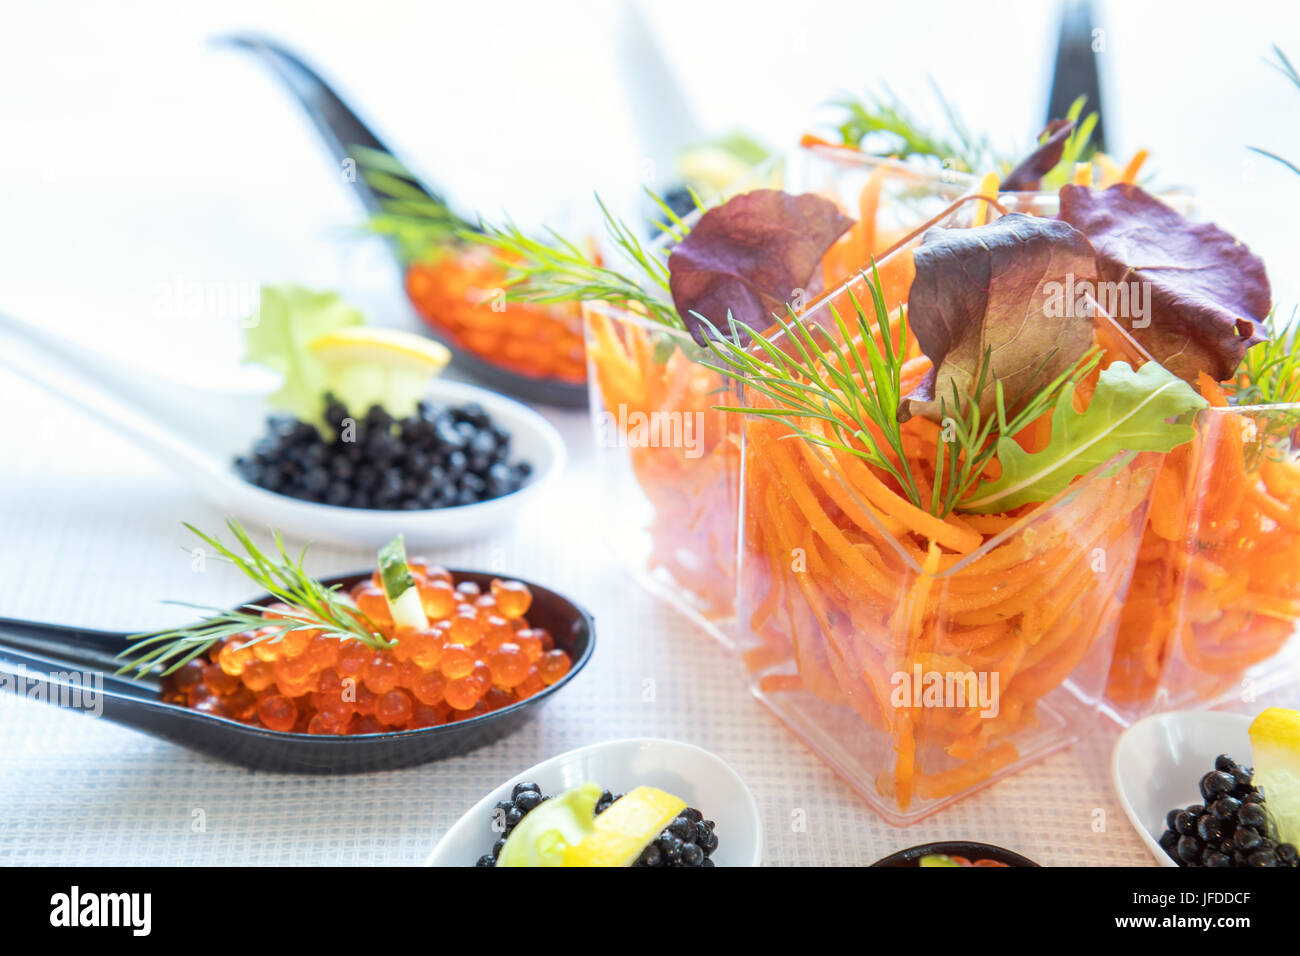 Catering banquet table with salad and caviar Stock Photo